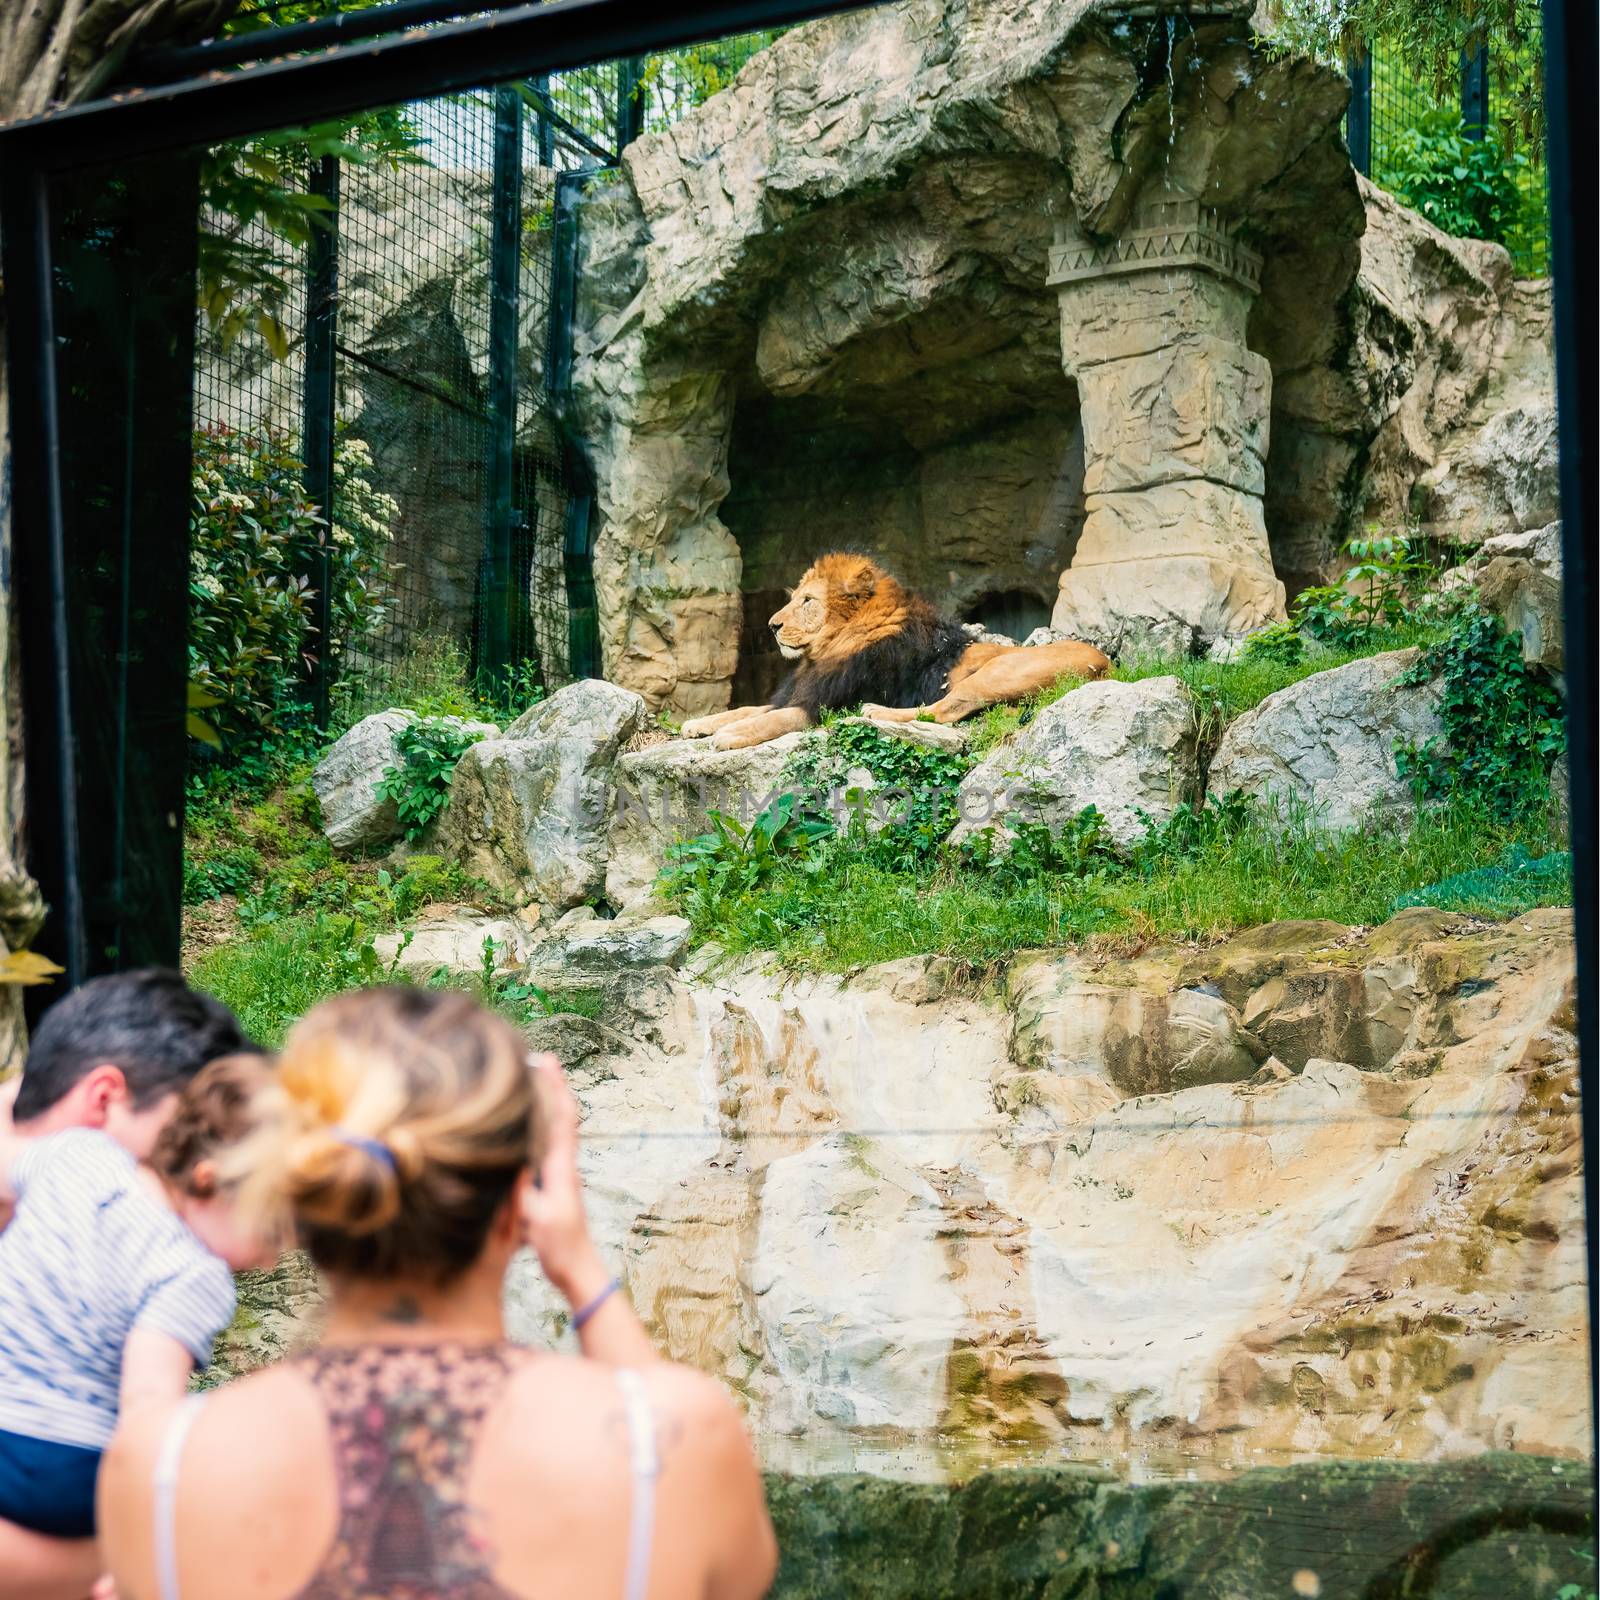 Woman shooting a photo to a Lion at the zoo through the window. Family time at zoo.